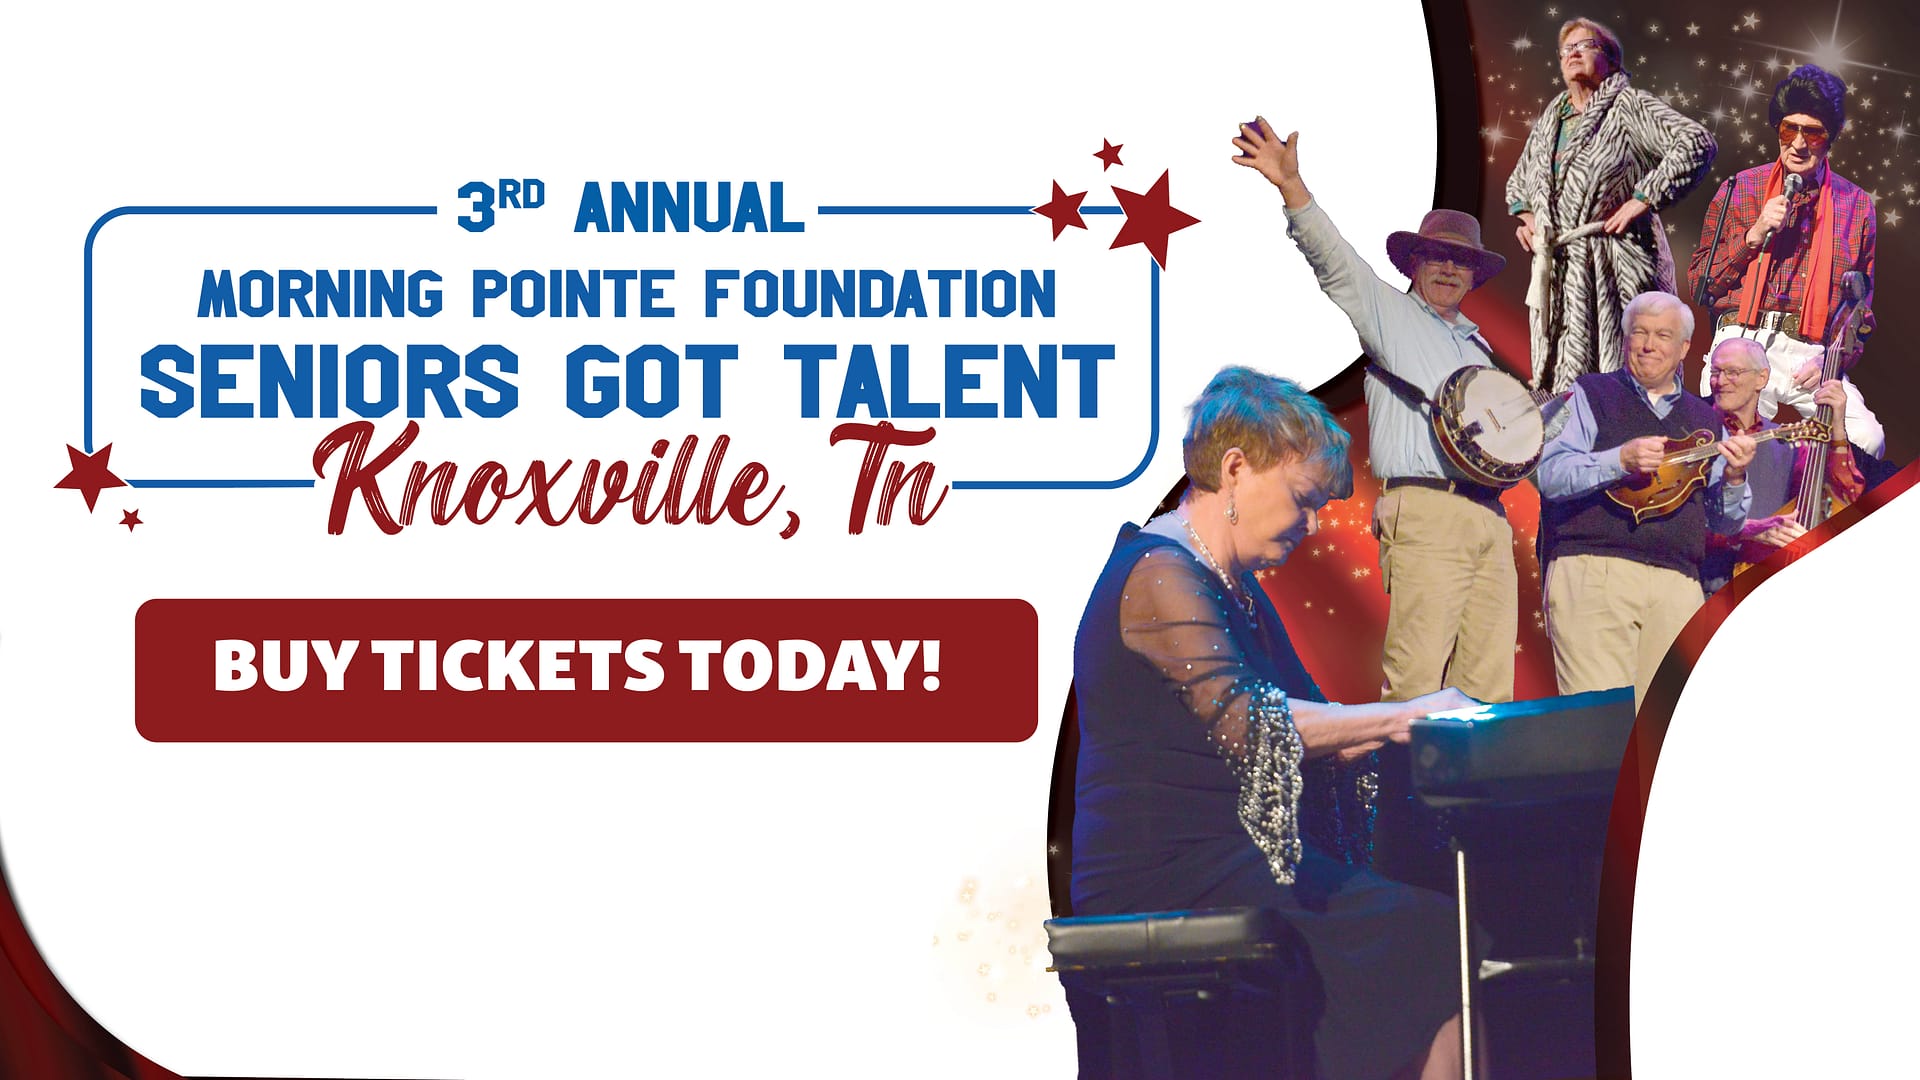 Morning Pointe Seniors Got Talent Knoxville tickets image 2023